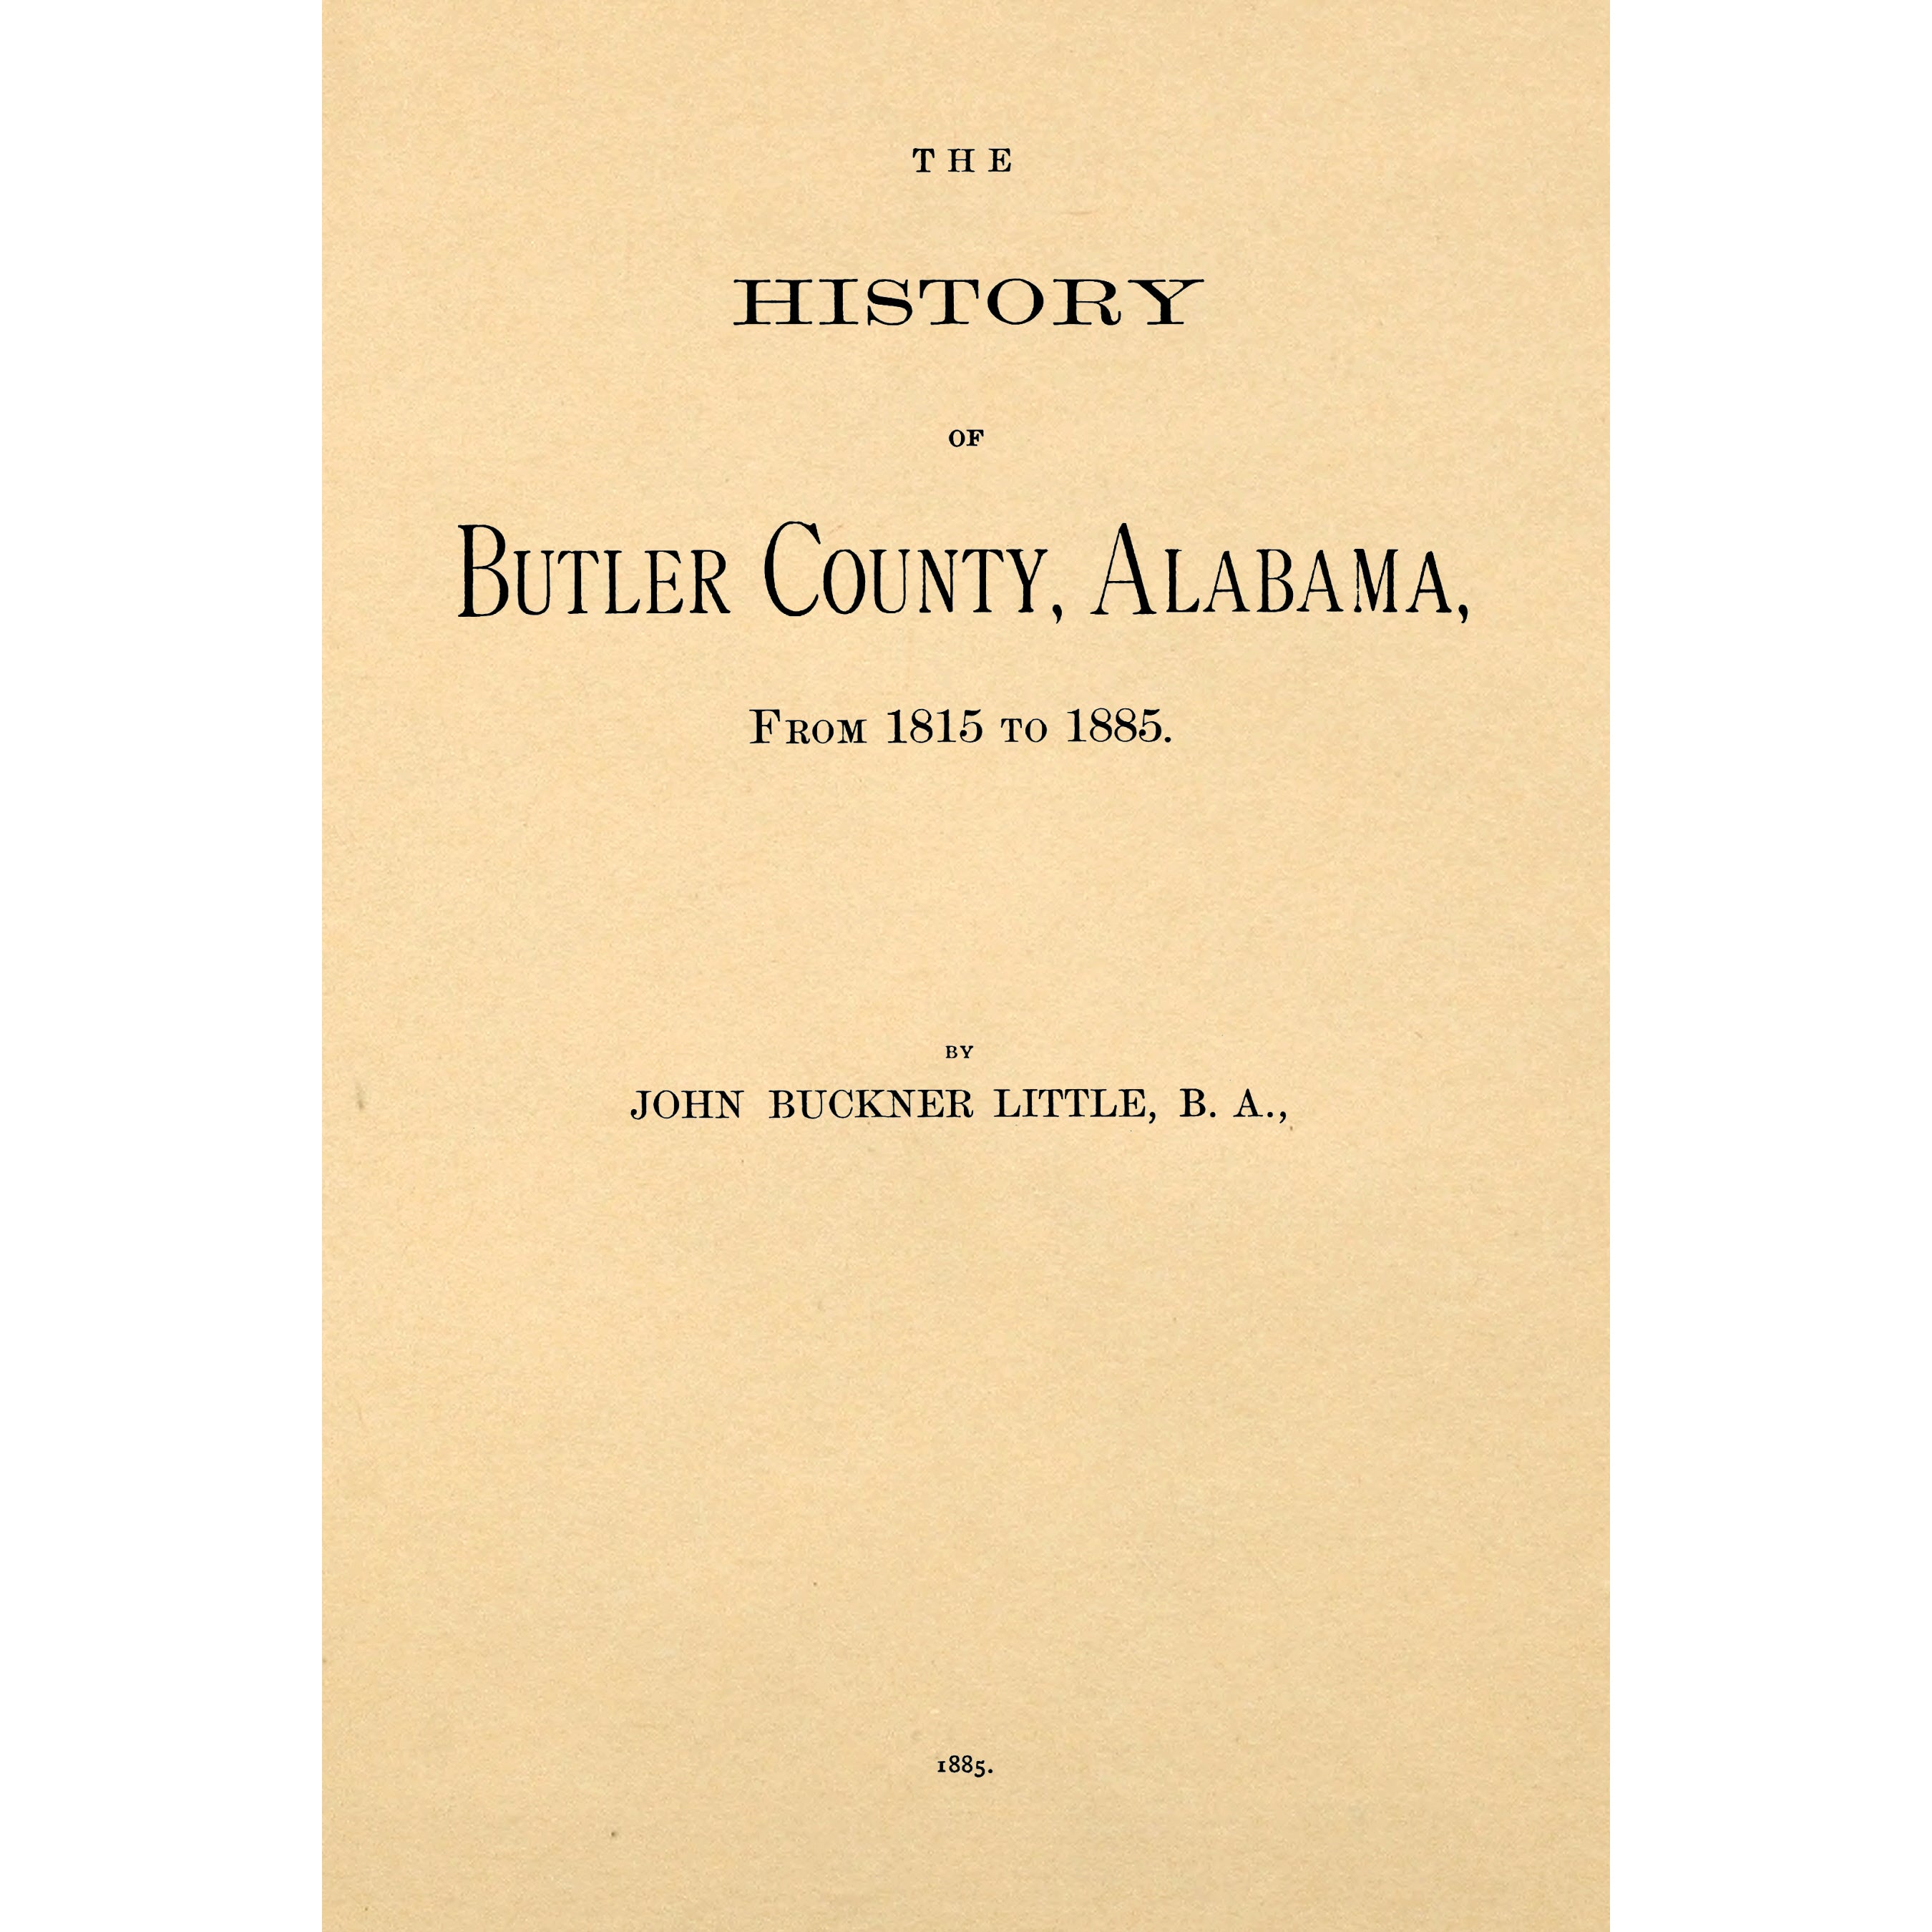 The history of Butler County, Alabama, from 1815 to 1885